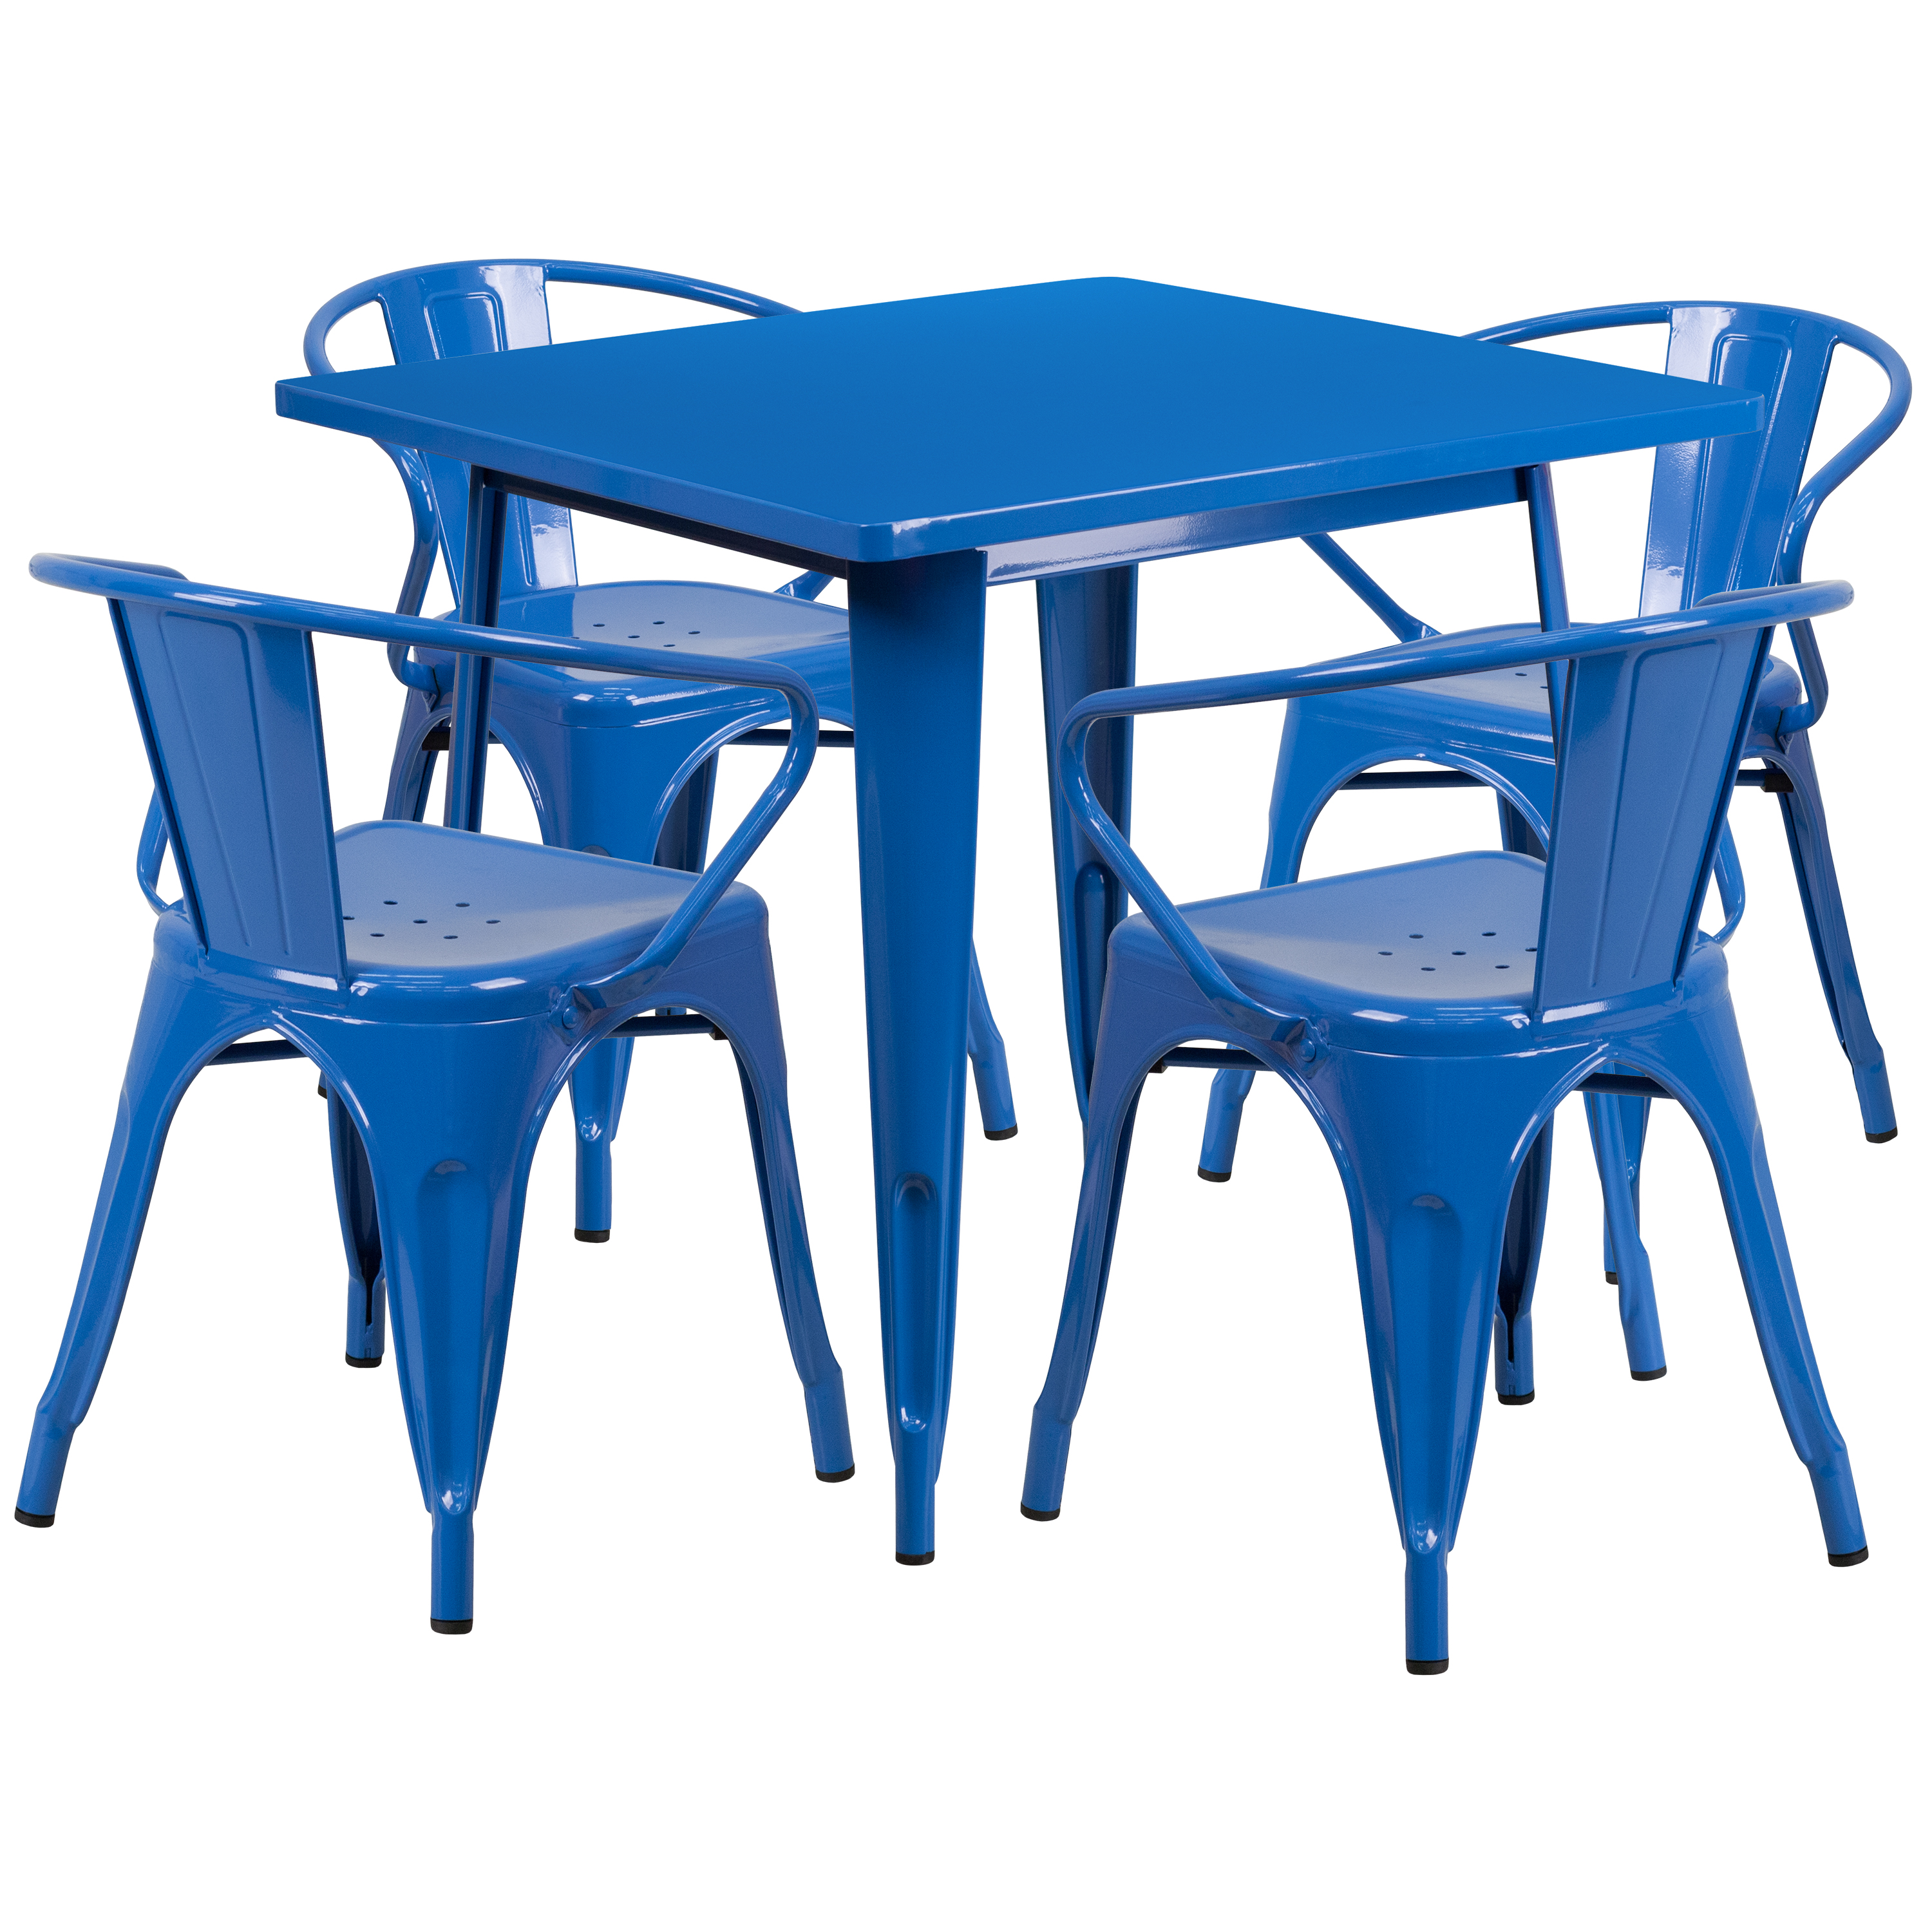 Flash Furniture Commercial Grade 31.5" Square Blue Metal Indoor-Outdoor Table Set with 4 Arm Chairs - image 2 of 5